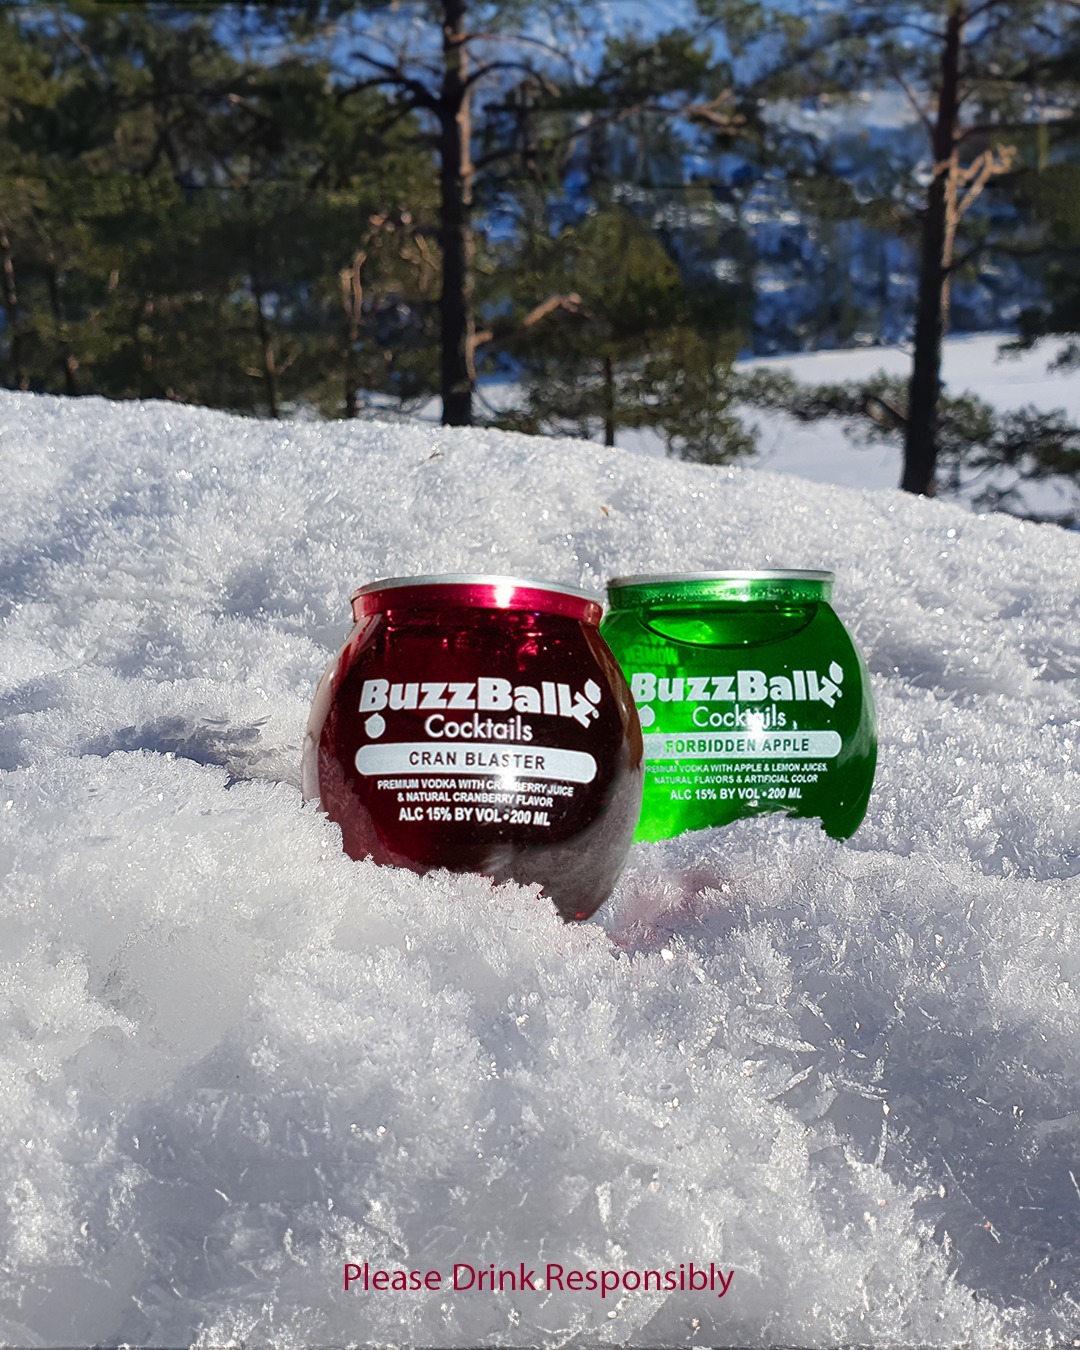 We know it's getting chilly out, but don't freeze your ballz 🥶